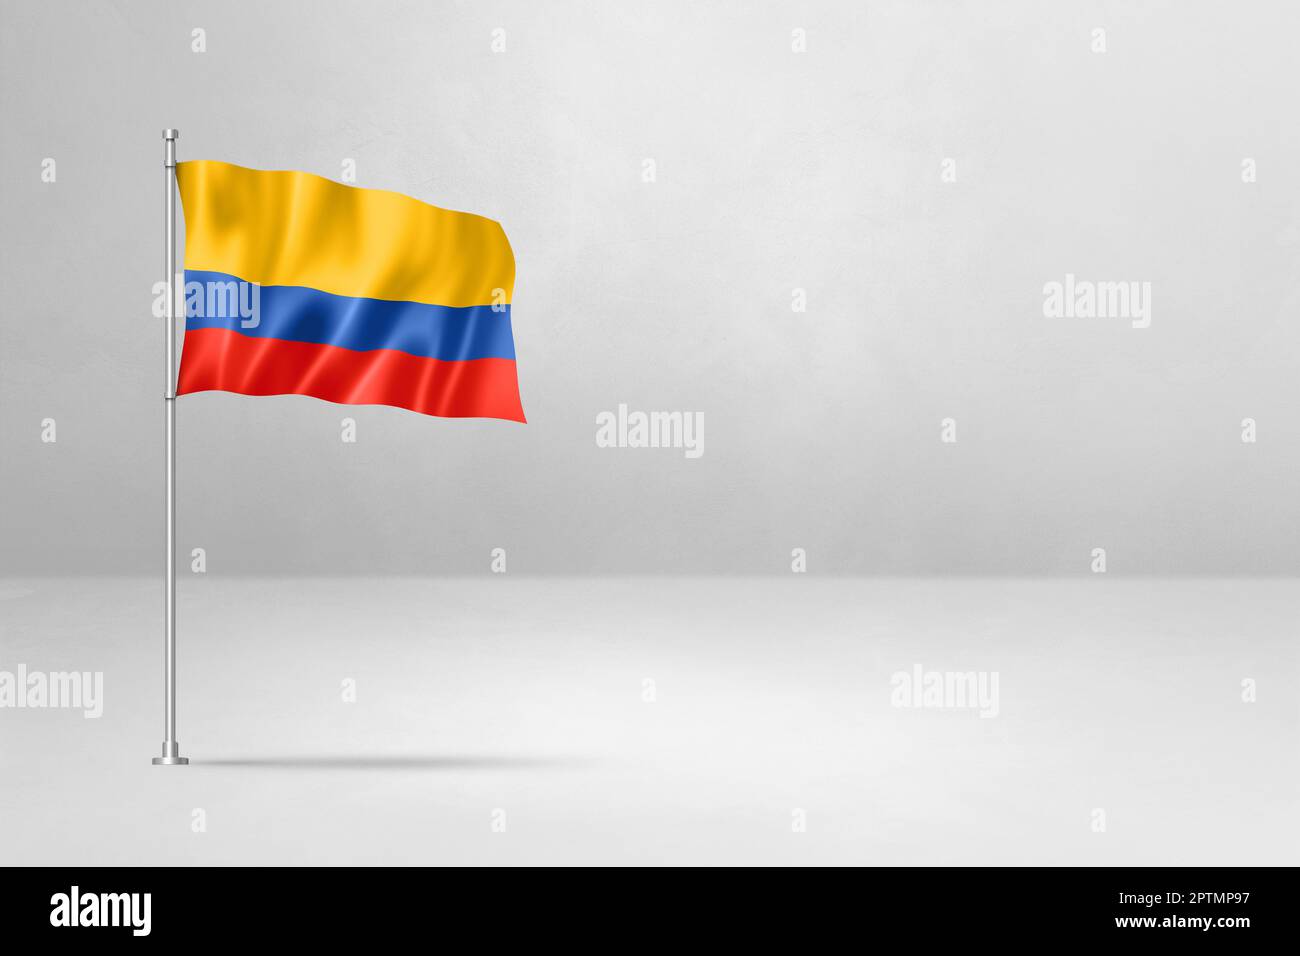 Colombia flag, 3D illustration, isolated on white concrete wall background Stock Photo